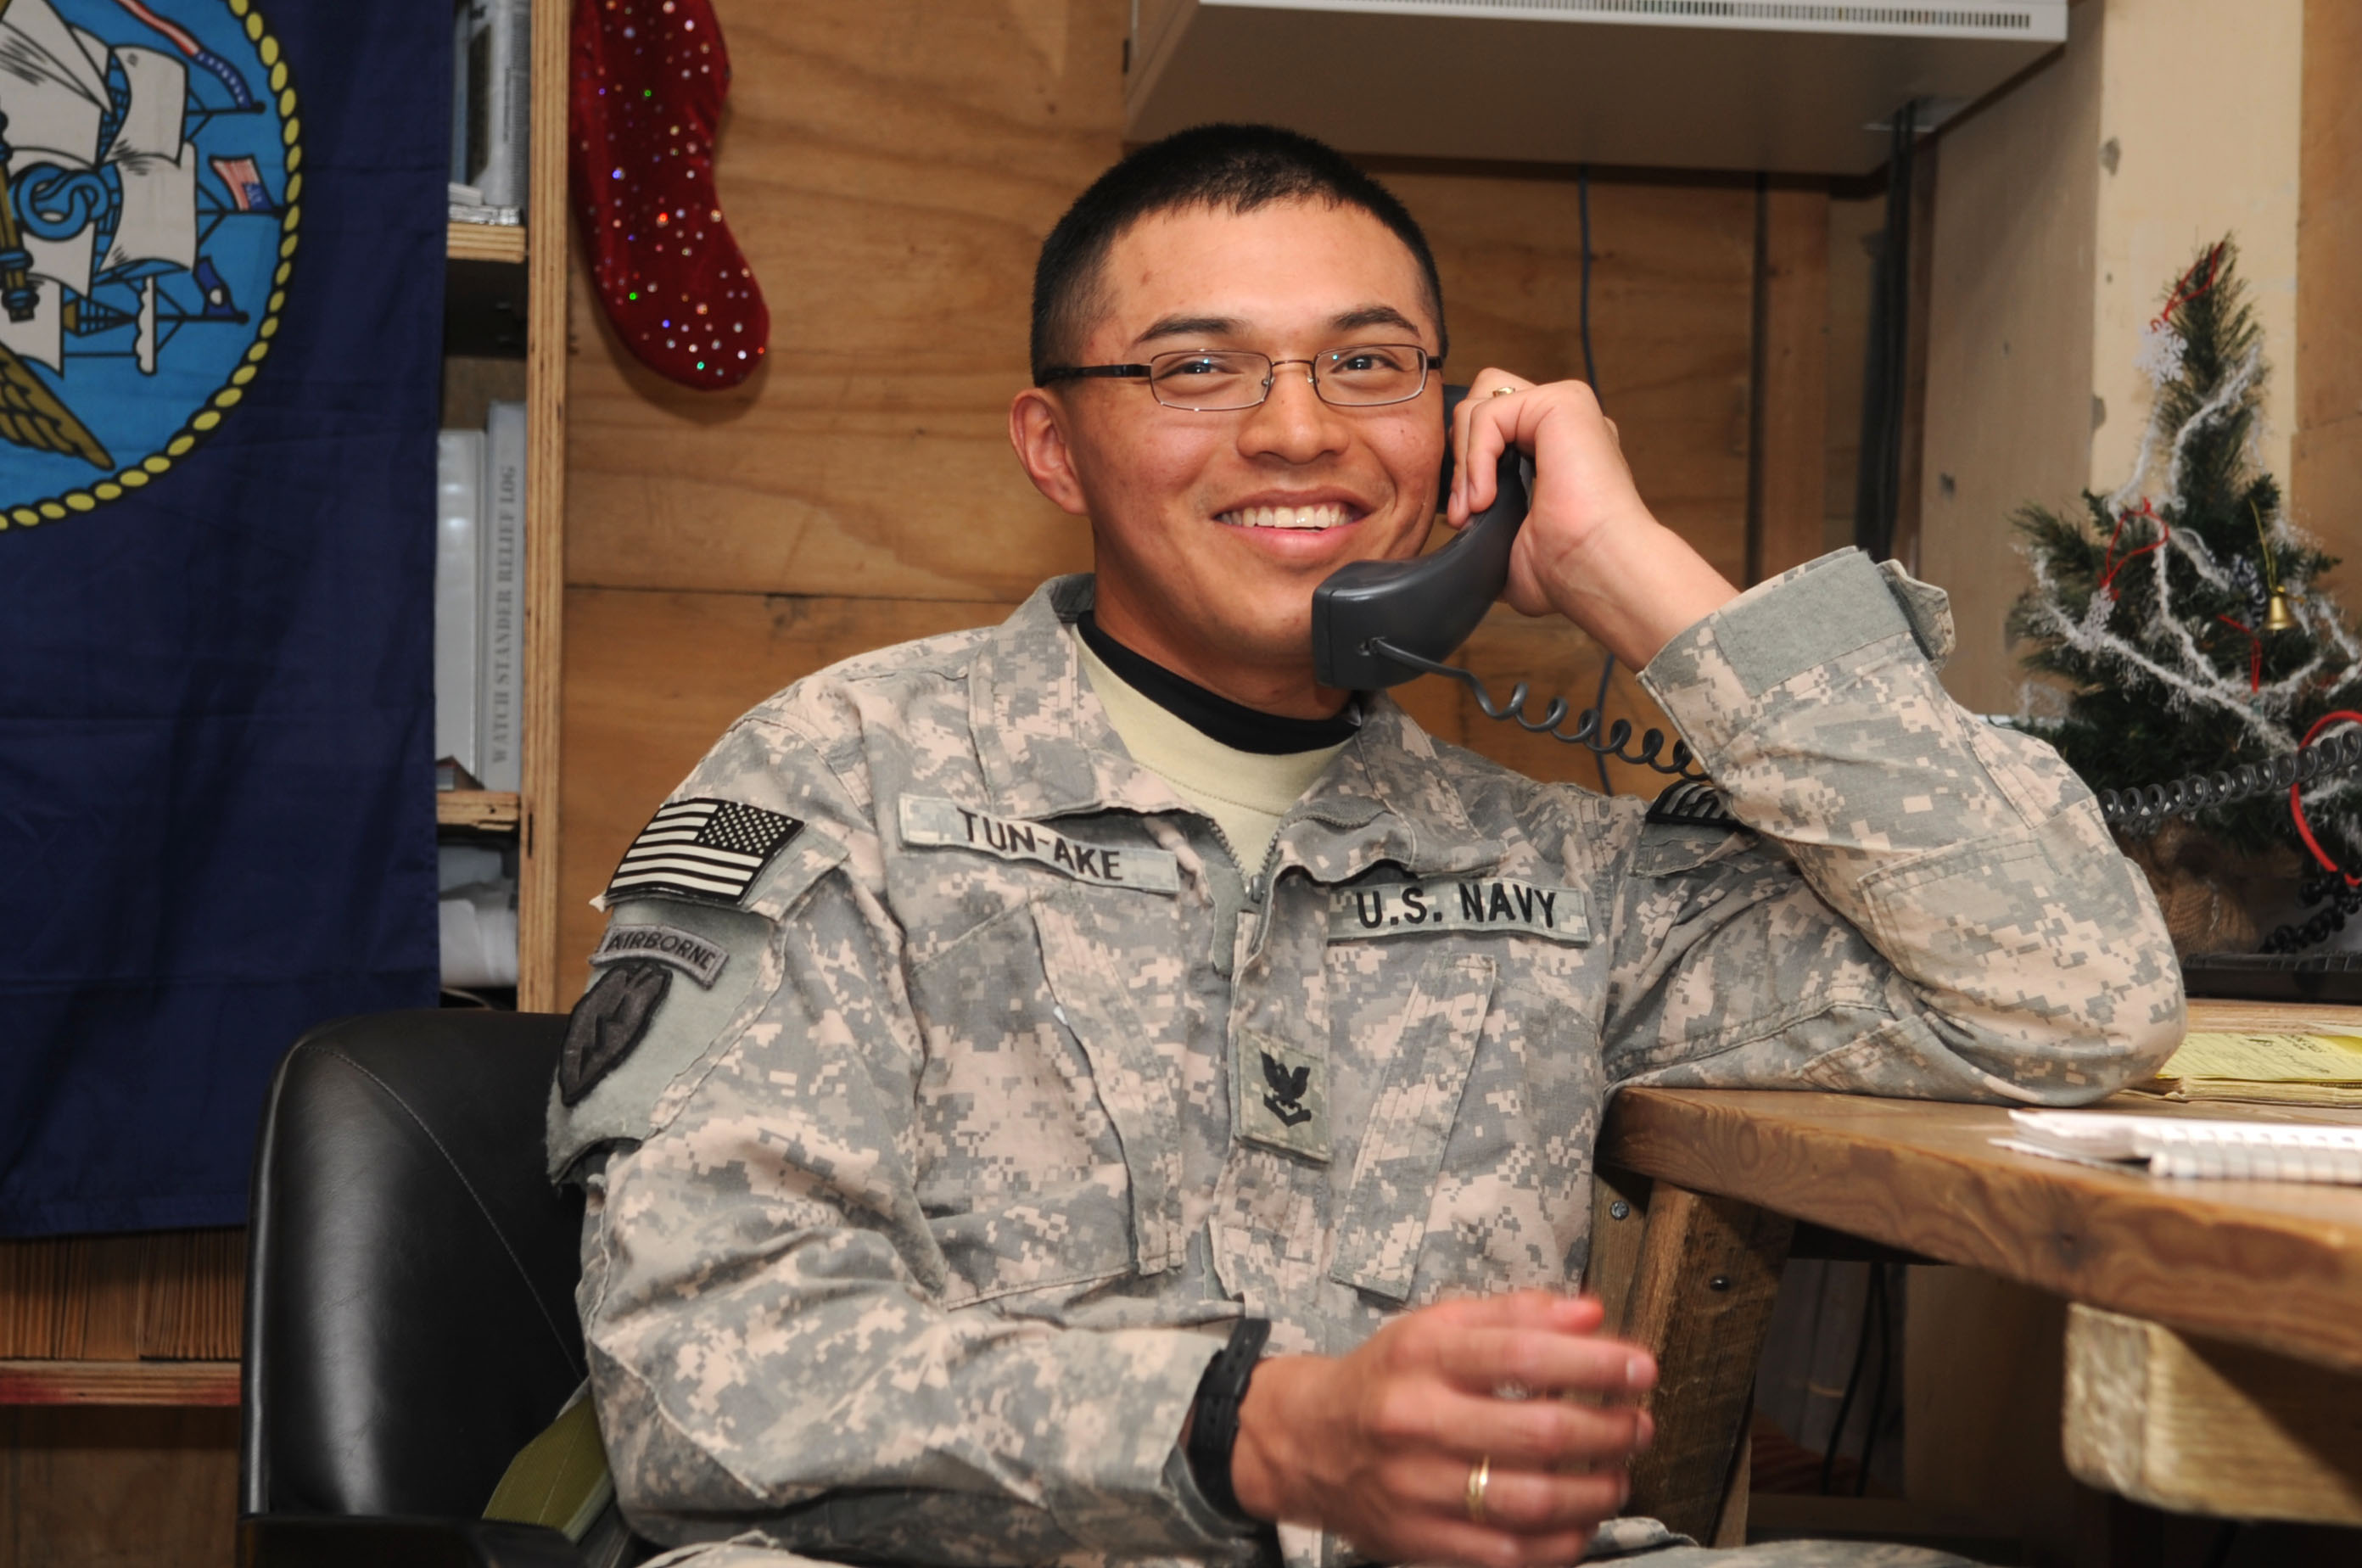 US Navy 091224-F-7418E-007 Petty Officer 3rd Class Luis Tun-Ake receives a surprise telephone call from President Barack Obama at Forward Operating Base Sharana, Afghanistan